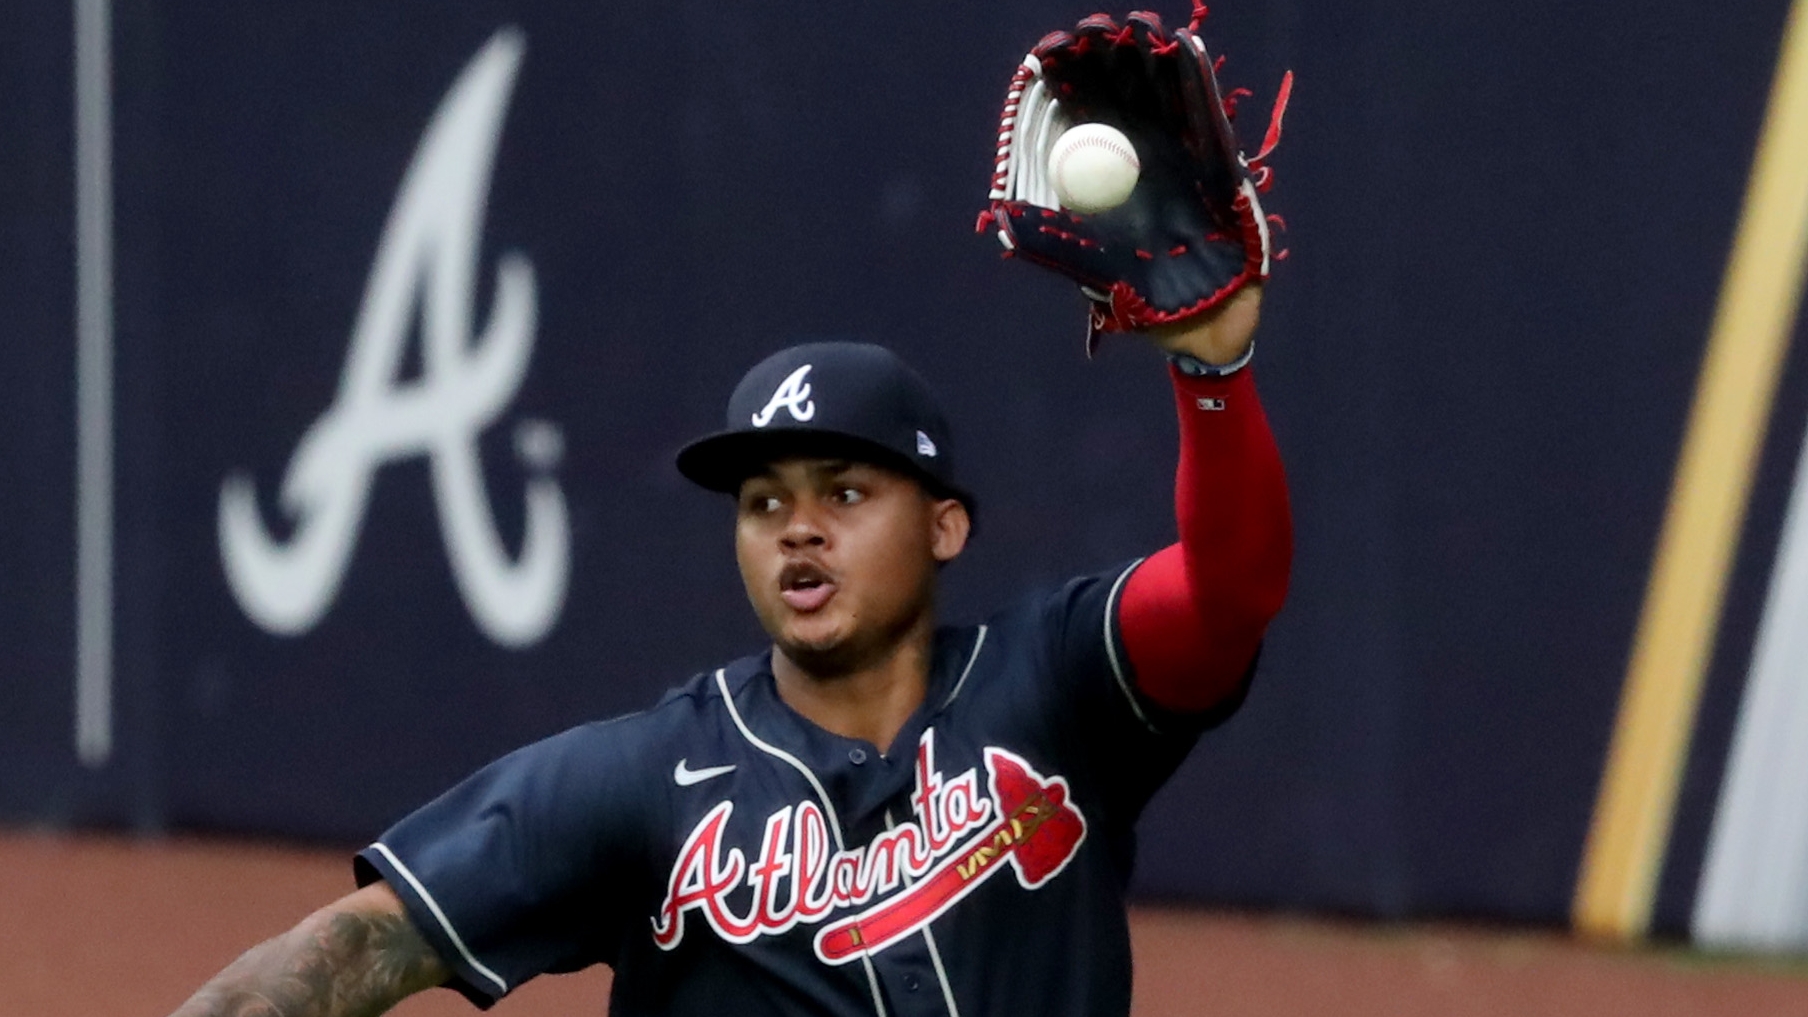 Nick Markakis isn't enough for the Braves' outfield - Beyond the